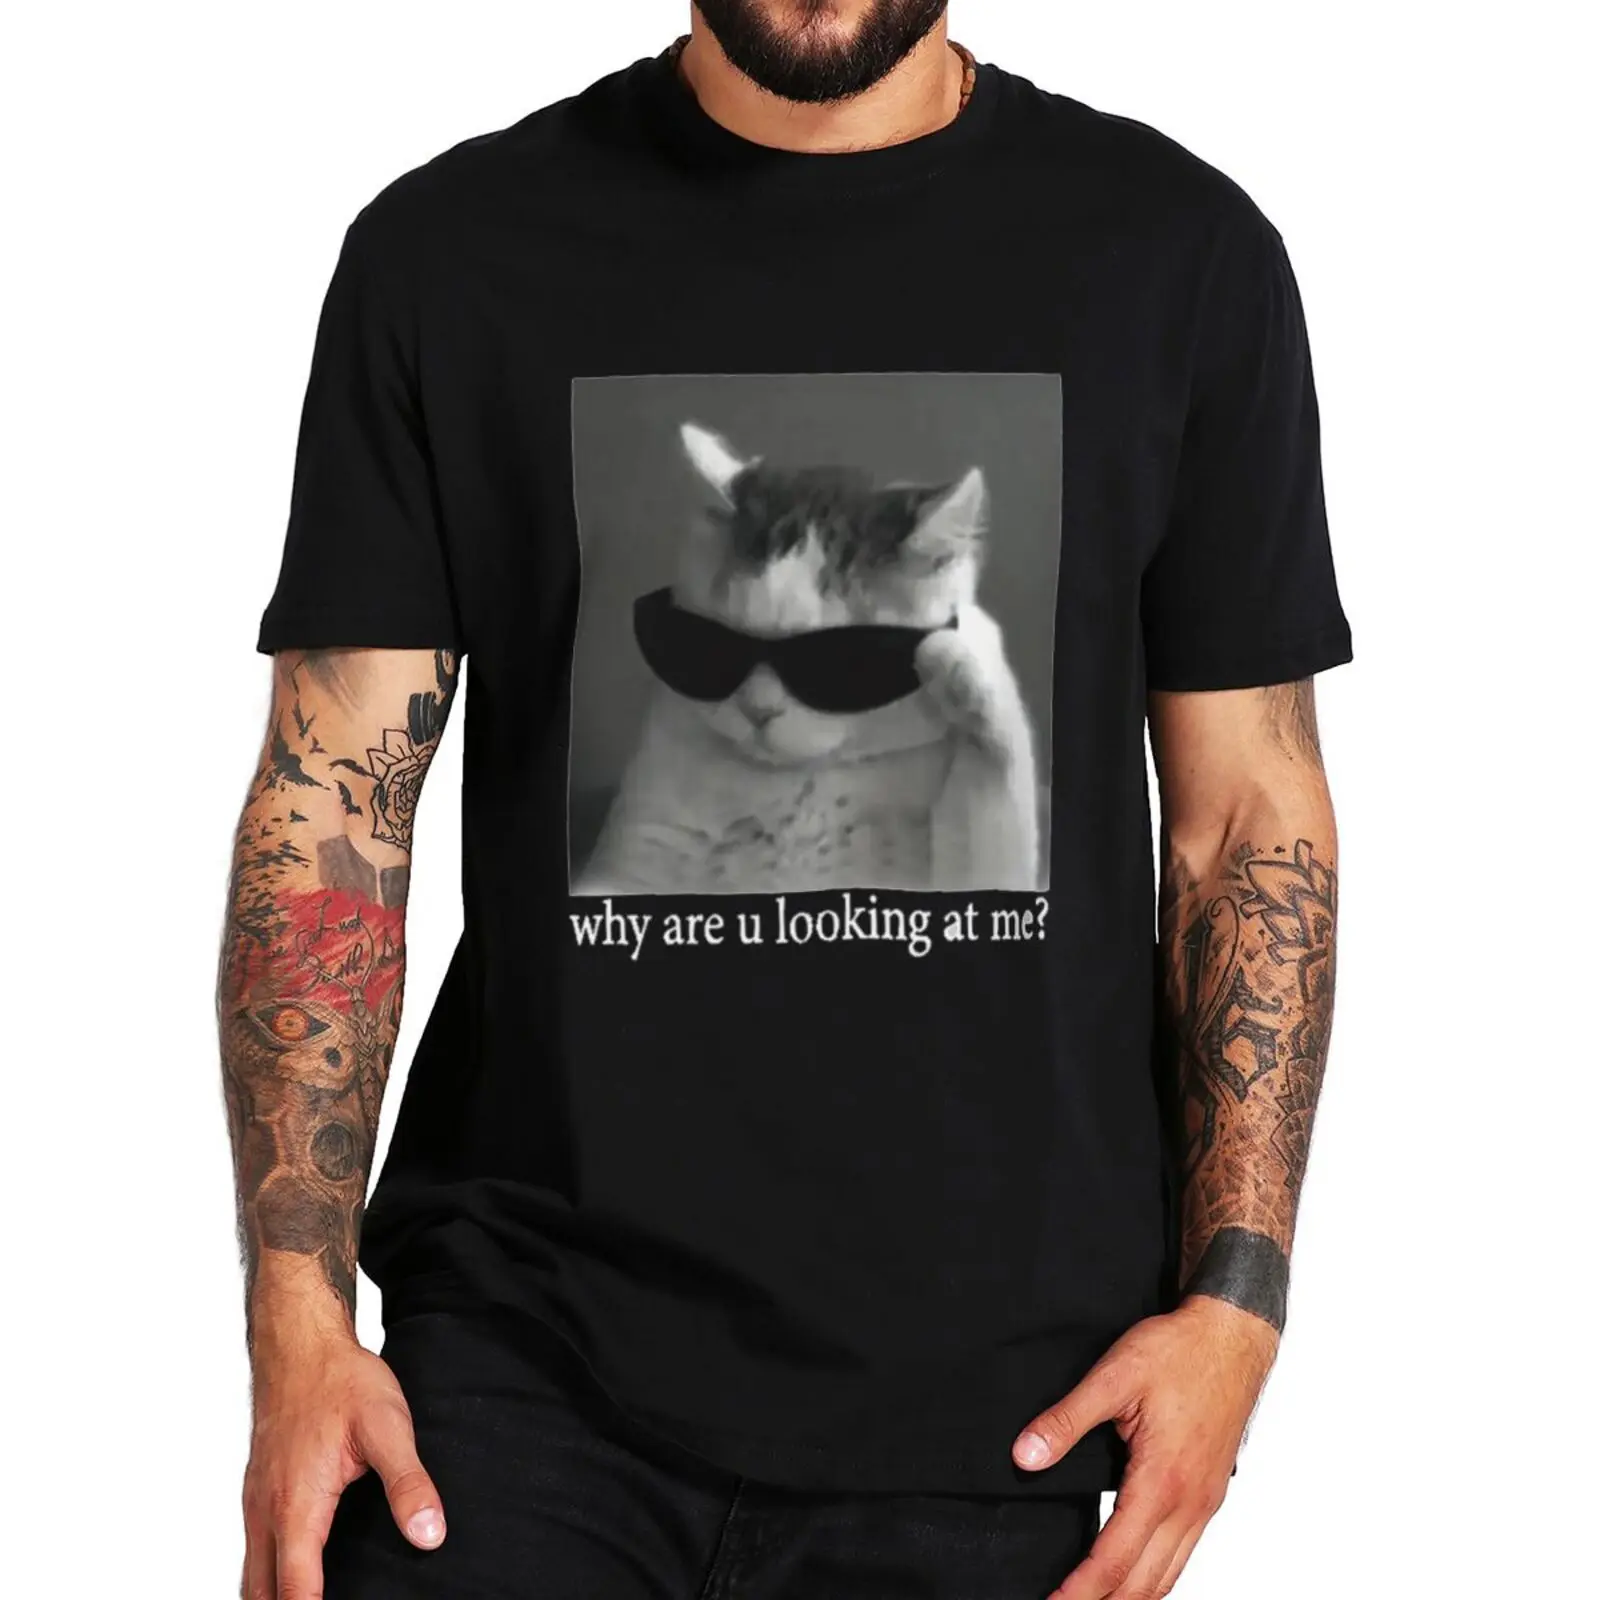 

Why Are You Looking Me T-shirt Cute Cat Funny Slogan Graphic Tee Tops Summer 100% Cotton Oversized Unisex Casual T Shirts